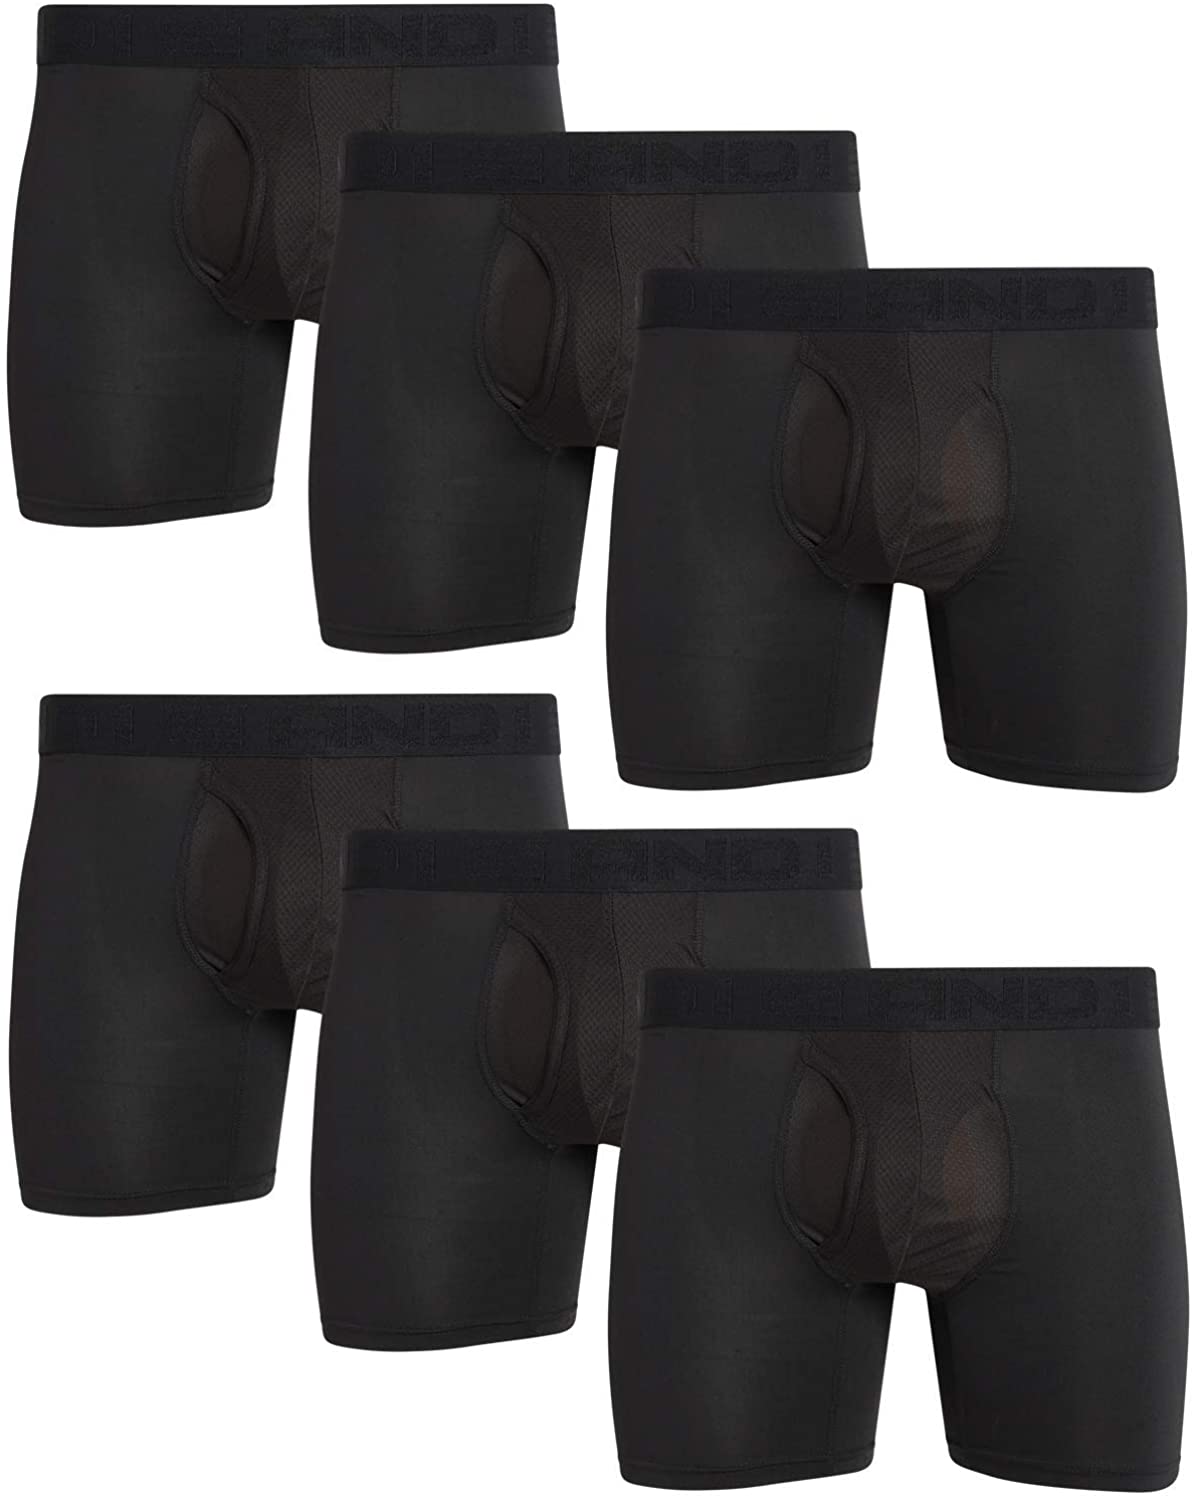 AND1 Men's High Performance Compression Boxer Briefs Active Underwear (6  Pack)